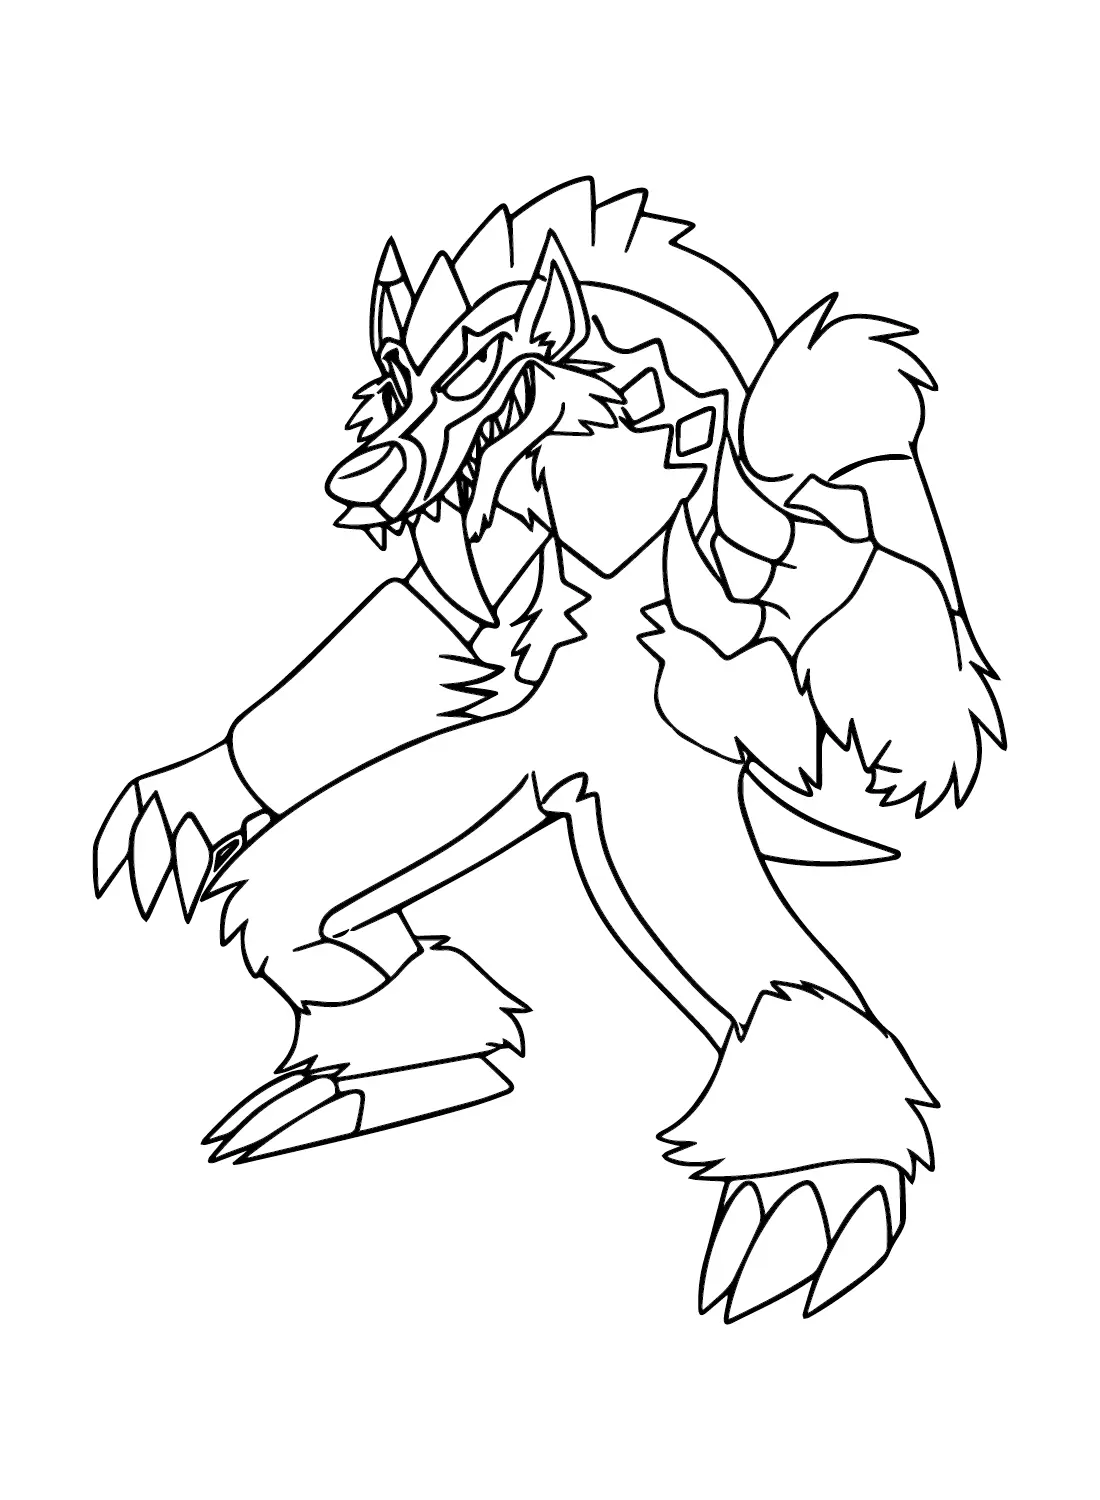 Obstagoon Coloring Pages